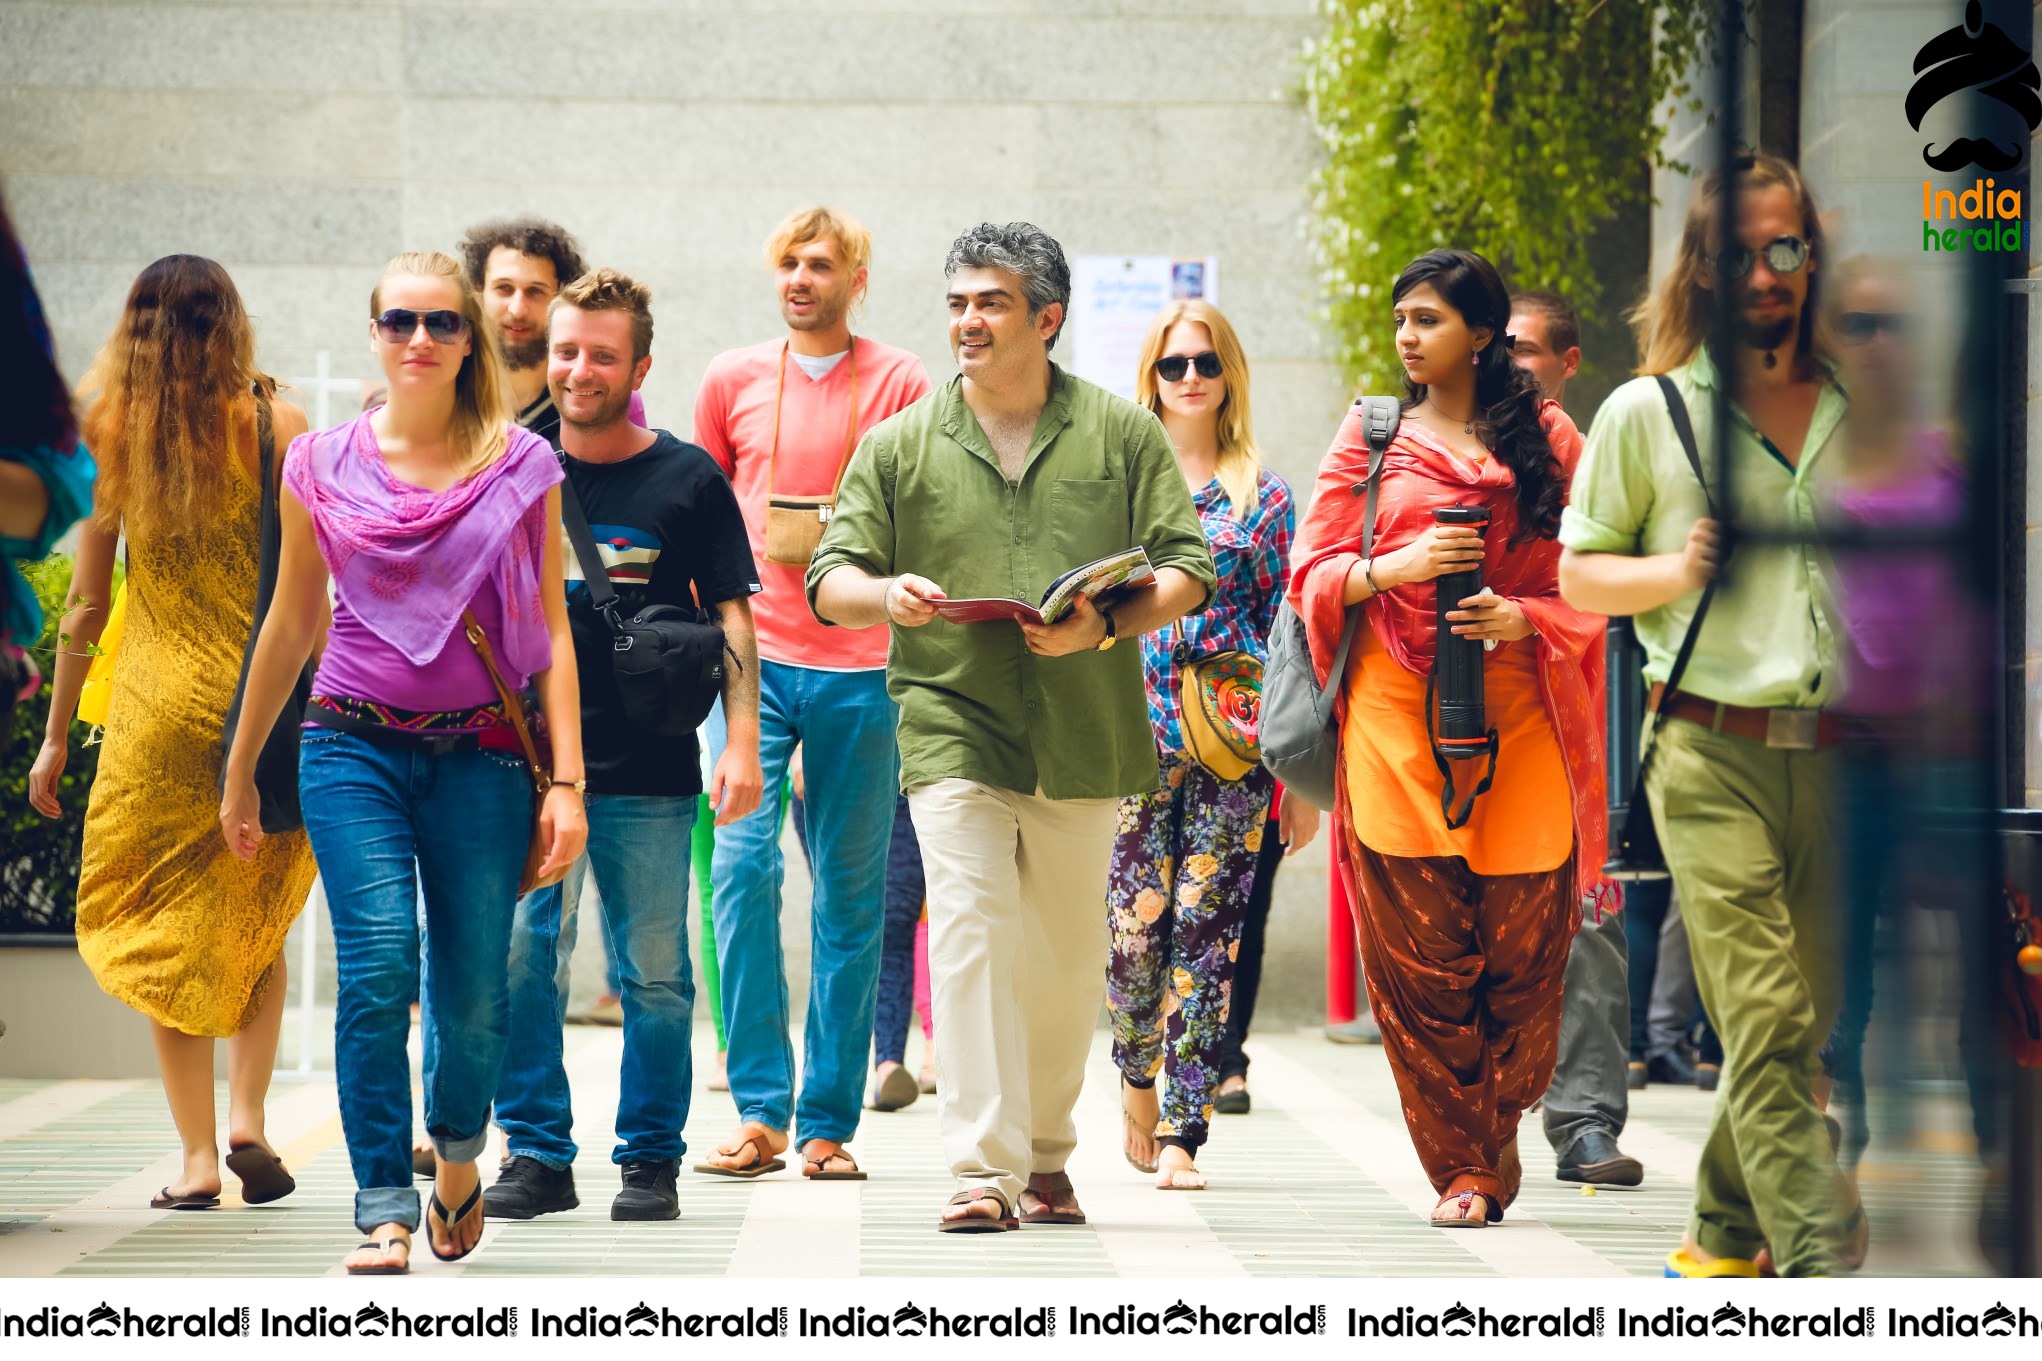 Rare and Unseen Stills of Ajith and Shruti Haasan in Vedalam Set 5